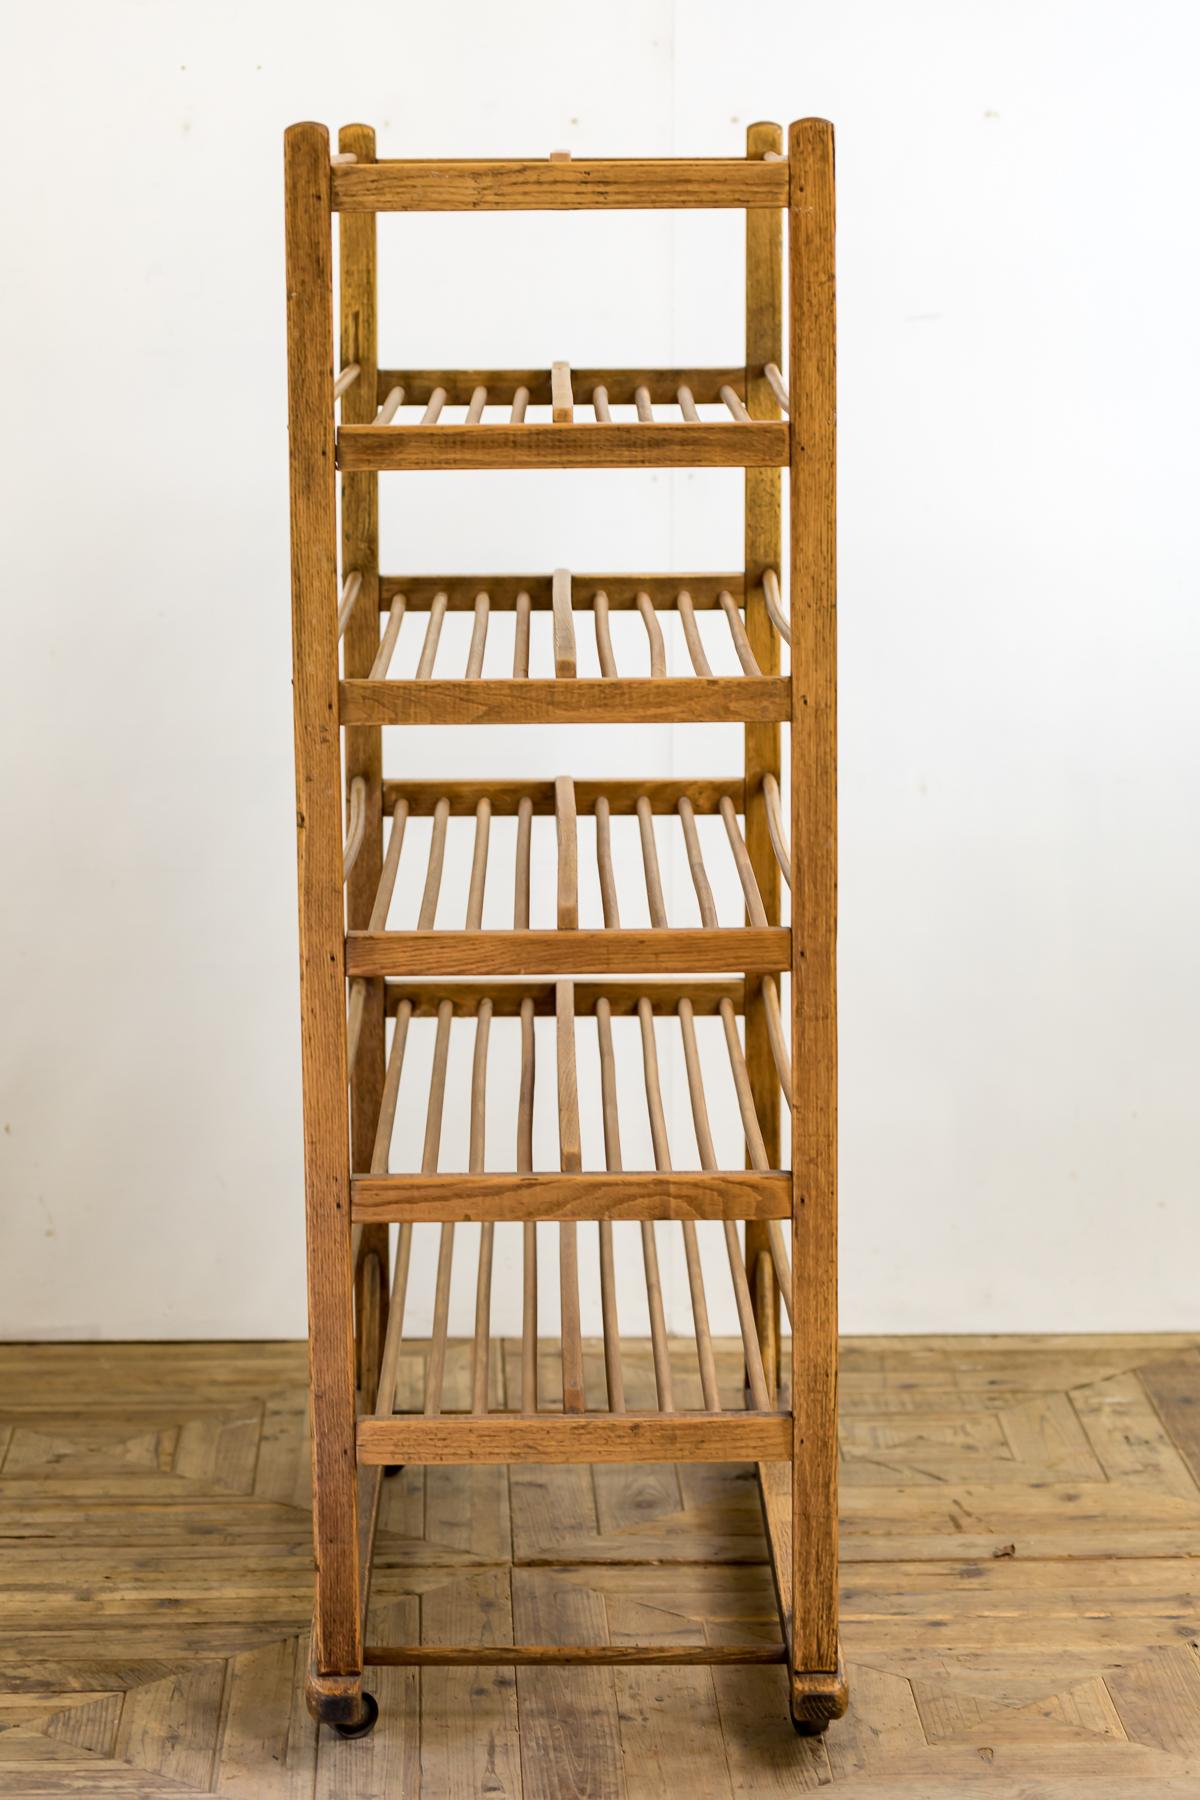 Polished Early 20th Century Edwardian Bakery Cooling / Proving / Display Rack For Sale